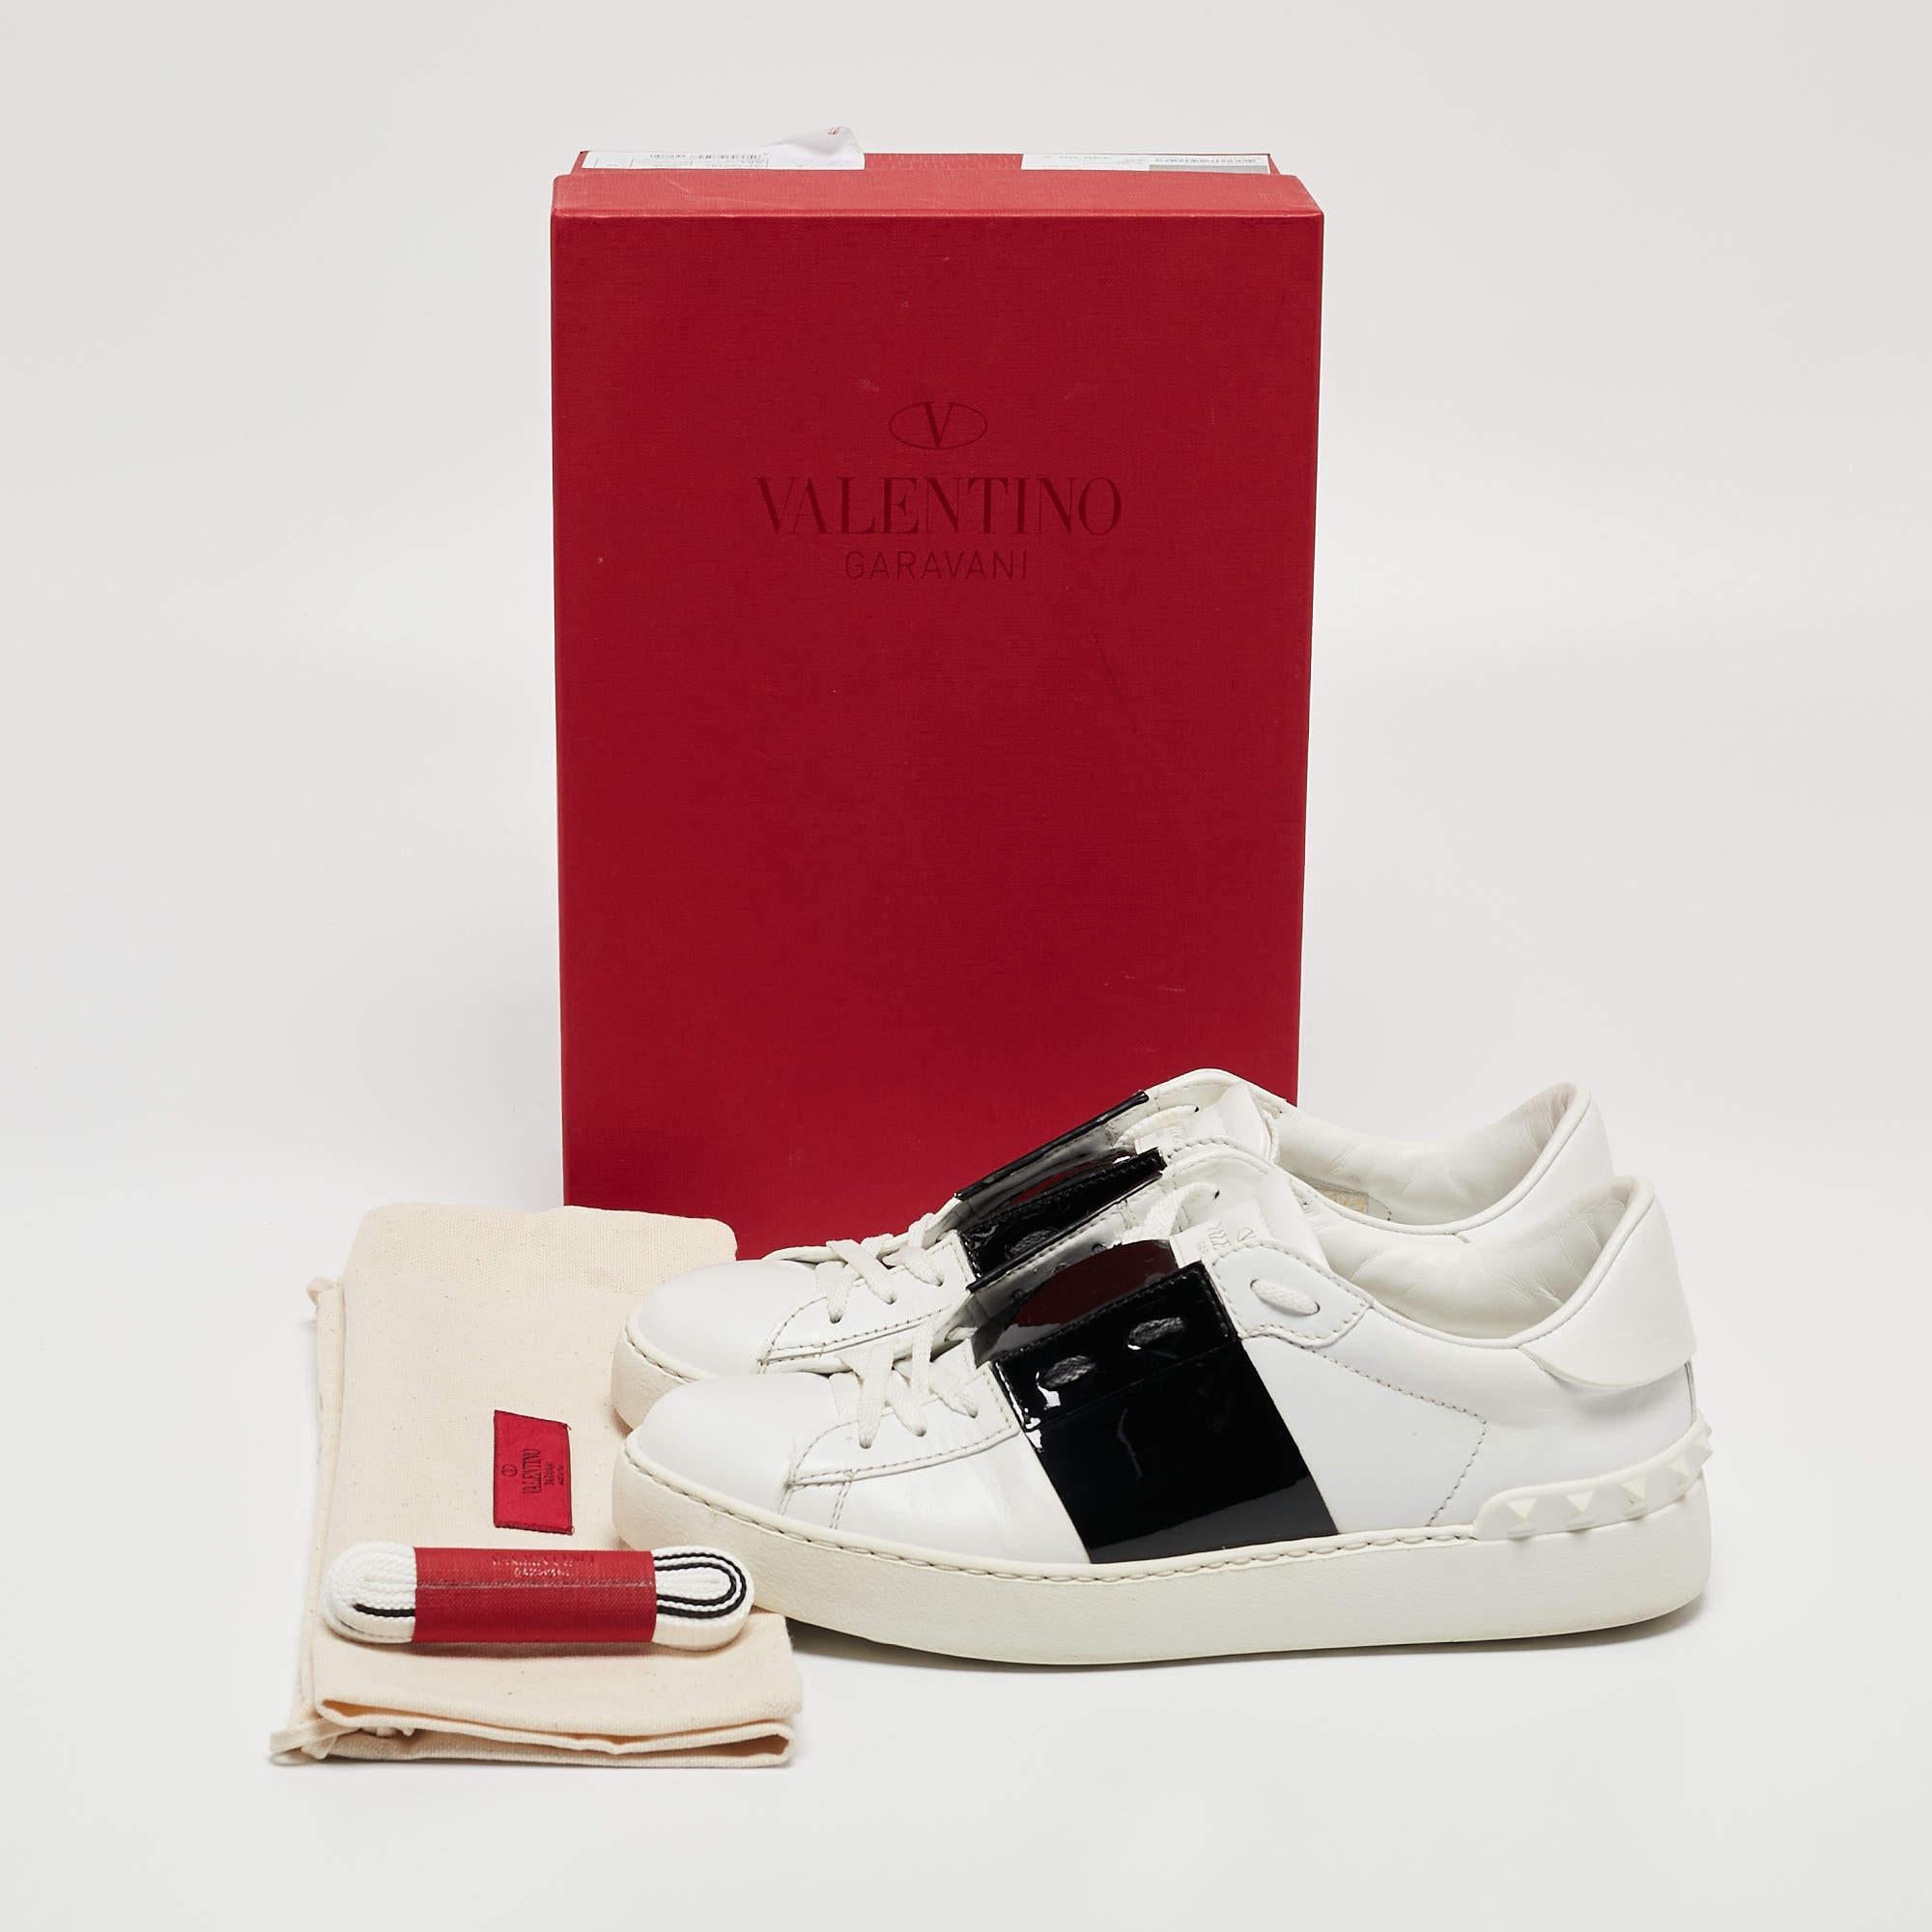 Valentino White/Black Leather Rockstud Low Top Sneakers Size 38 5